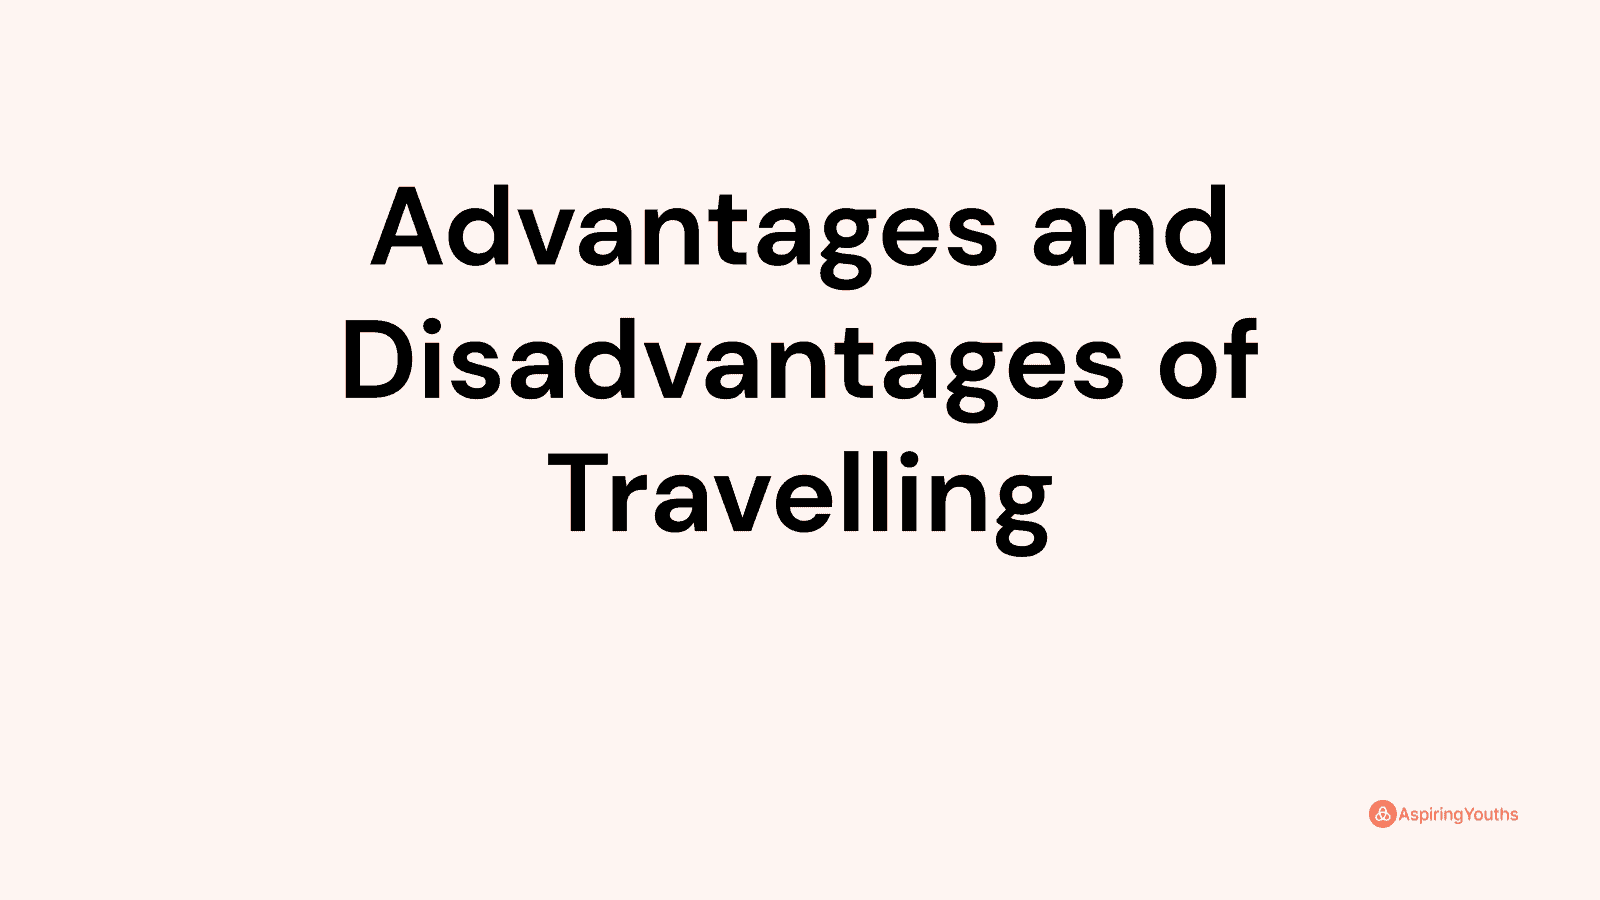 Advantages and disadvantages of Travelling